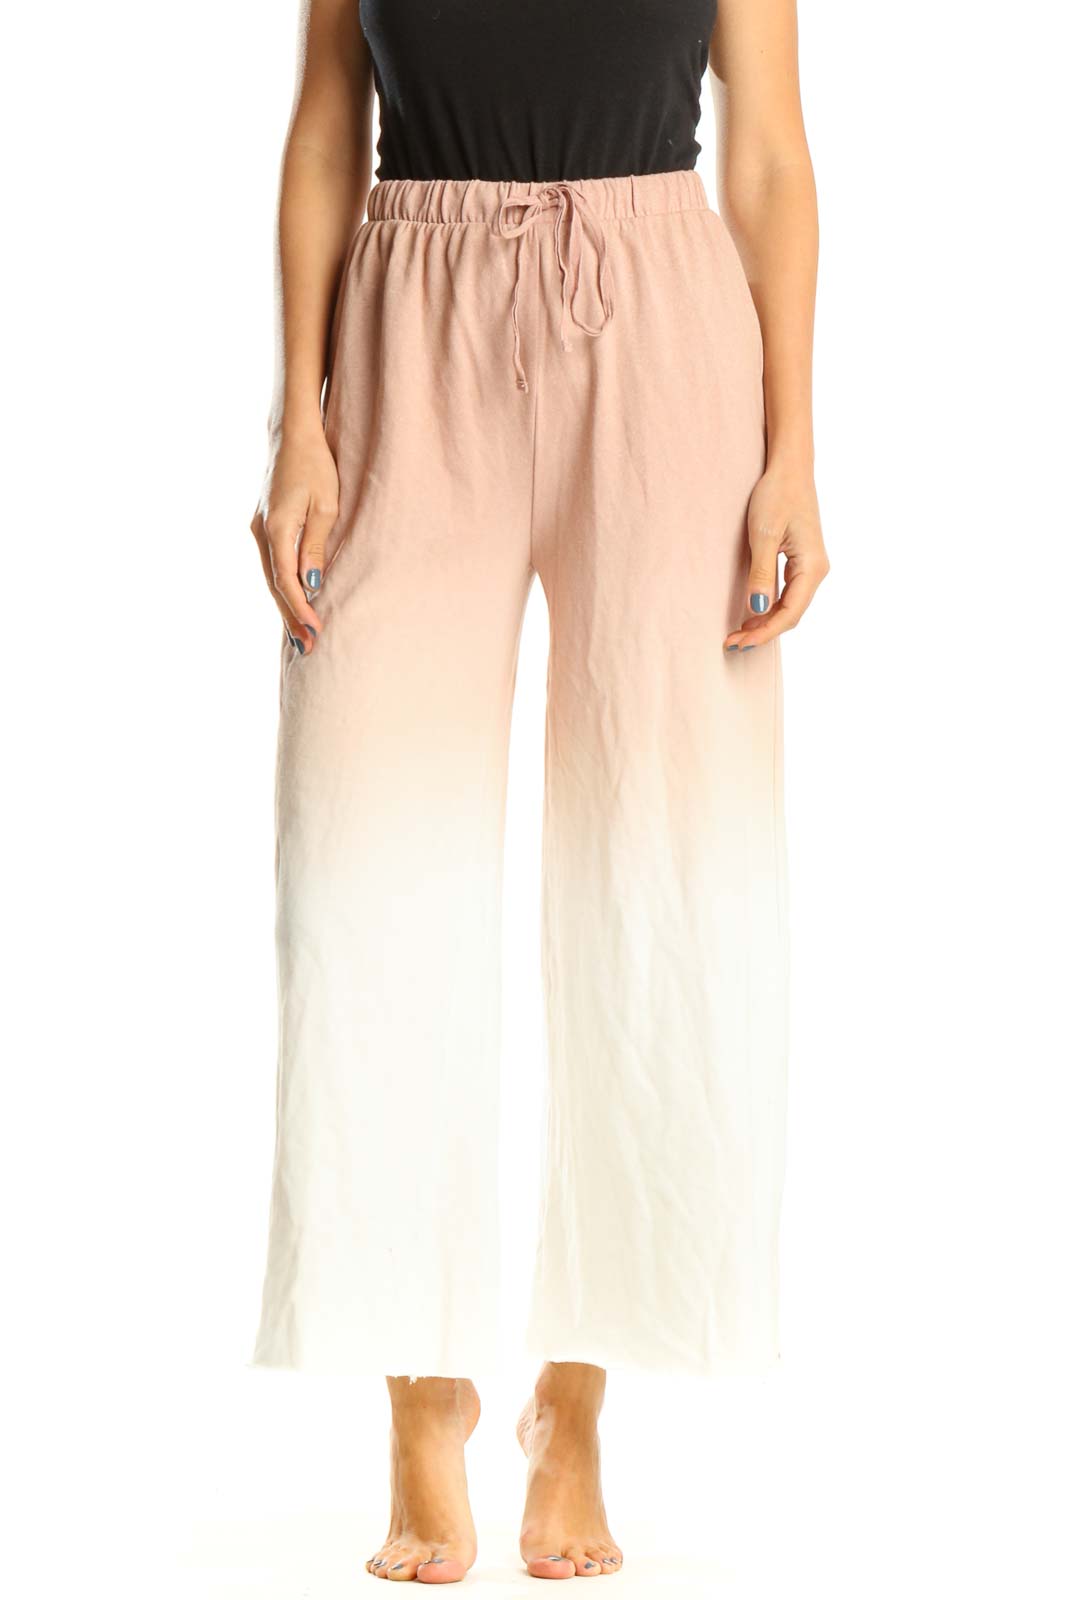 Pink Tie And Dye Casual Palazzo Pants Front